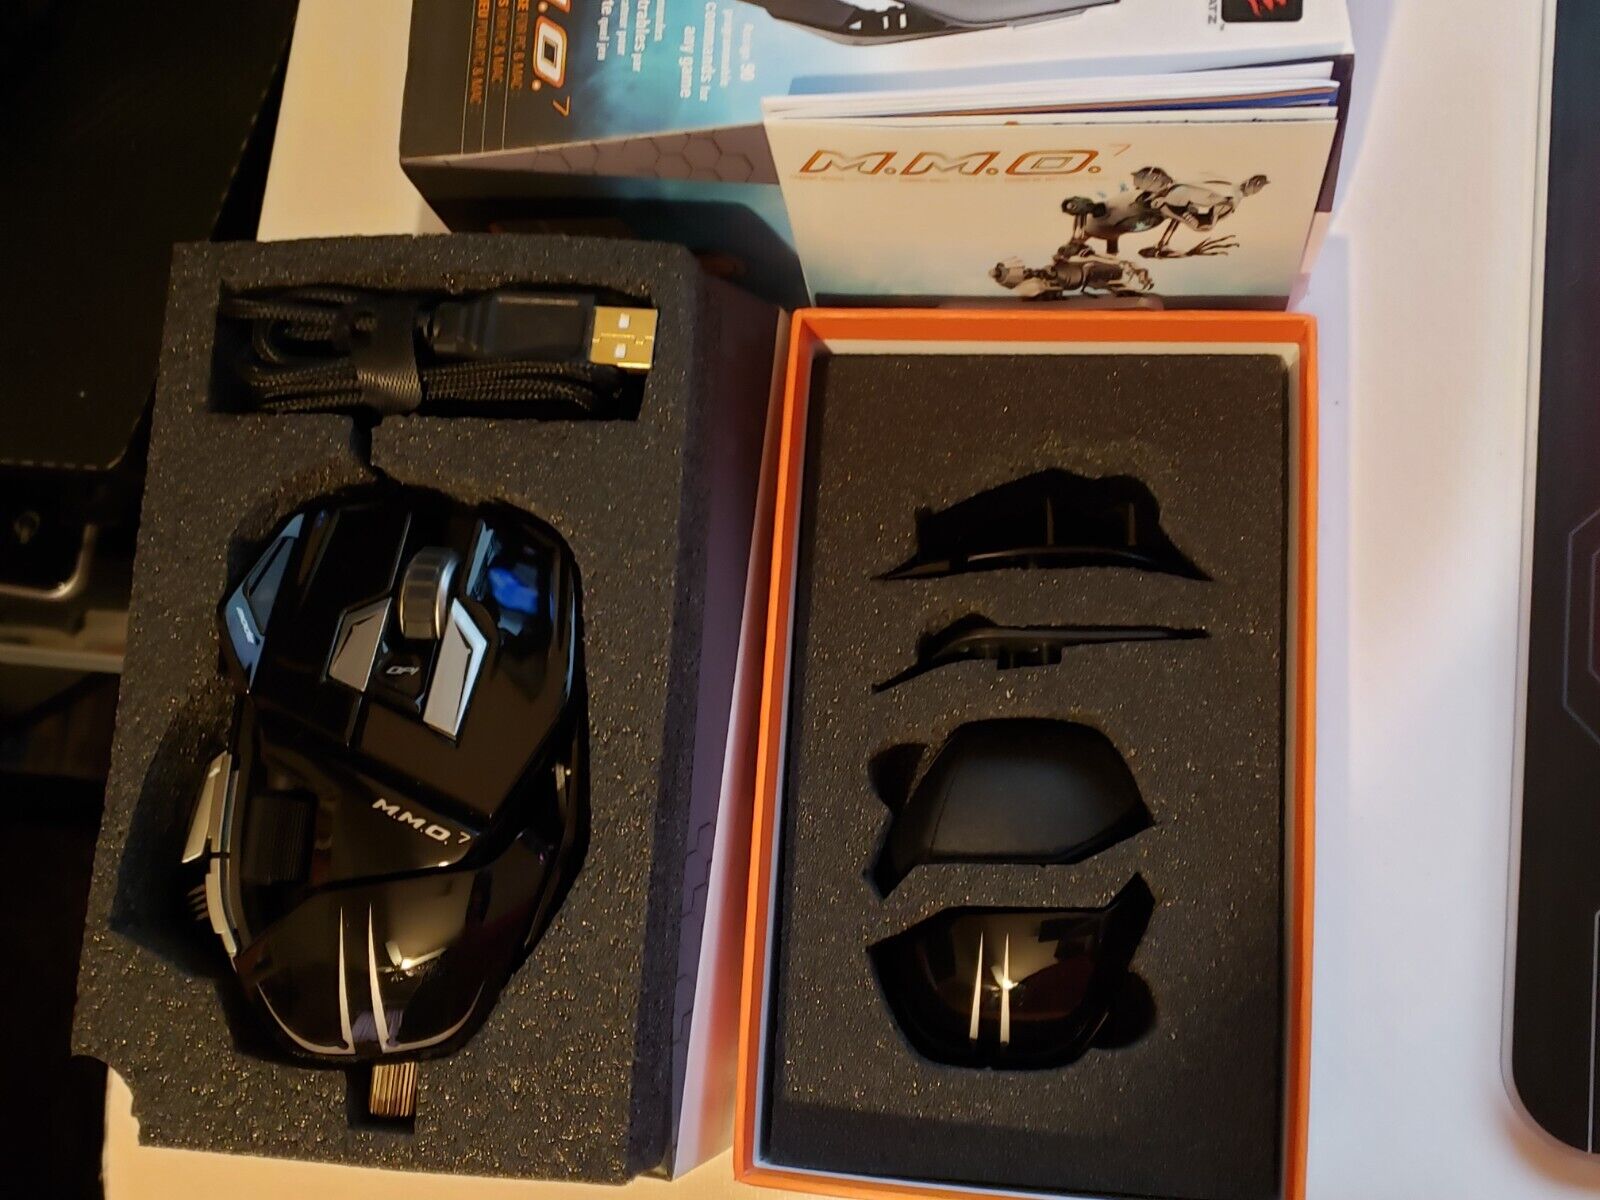 Mad Catz M.M.O. 7 mmo 7 Wired Gaming Mouse **Very Rare**